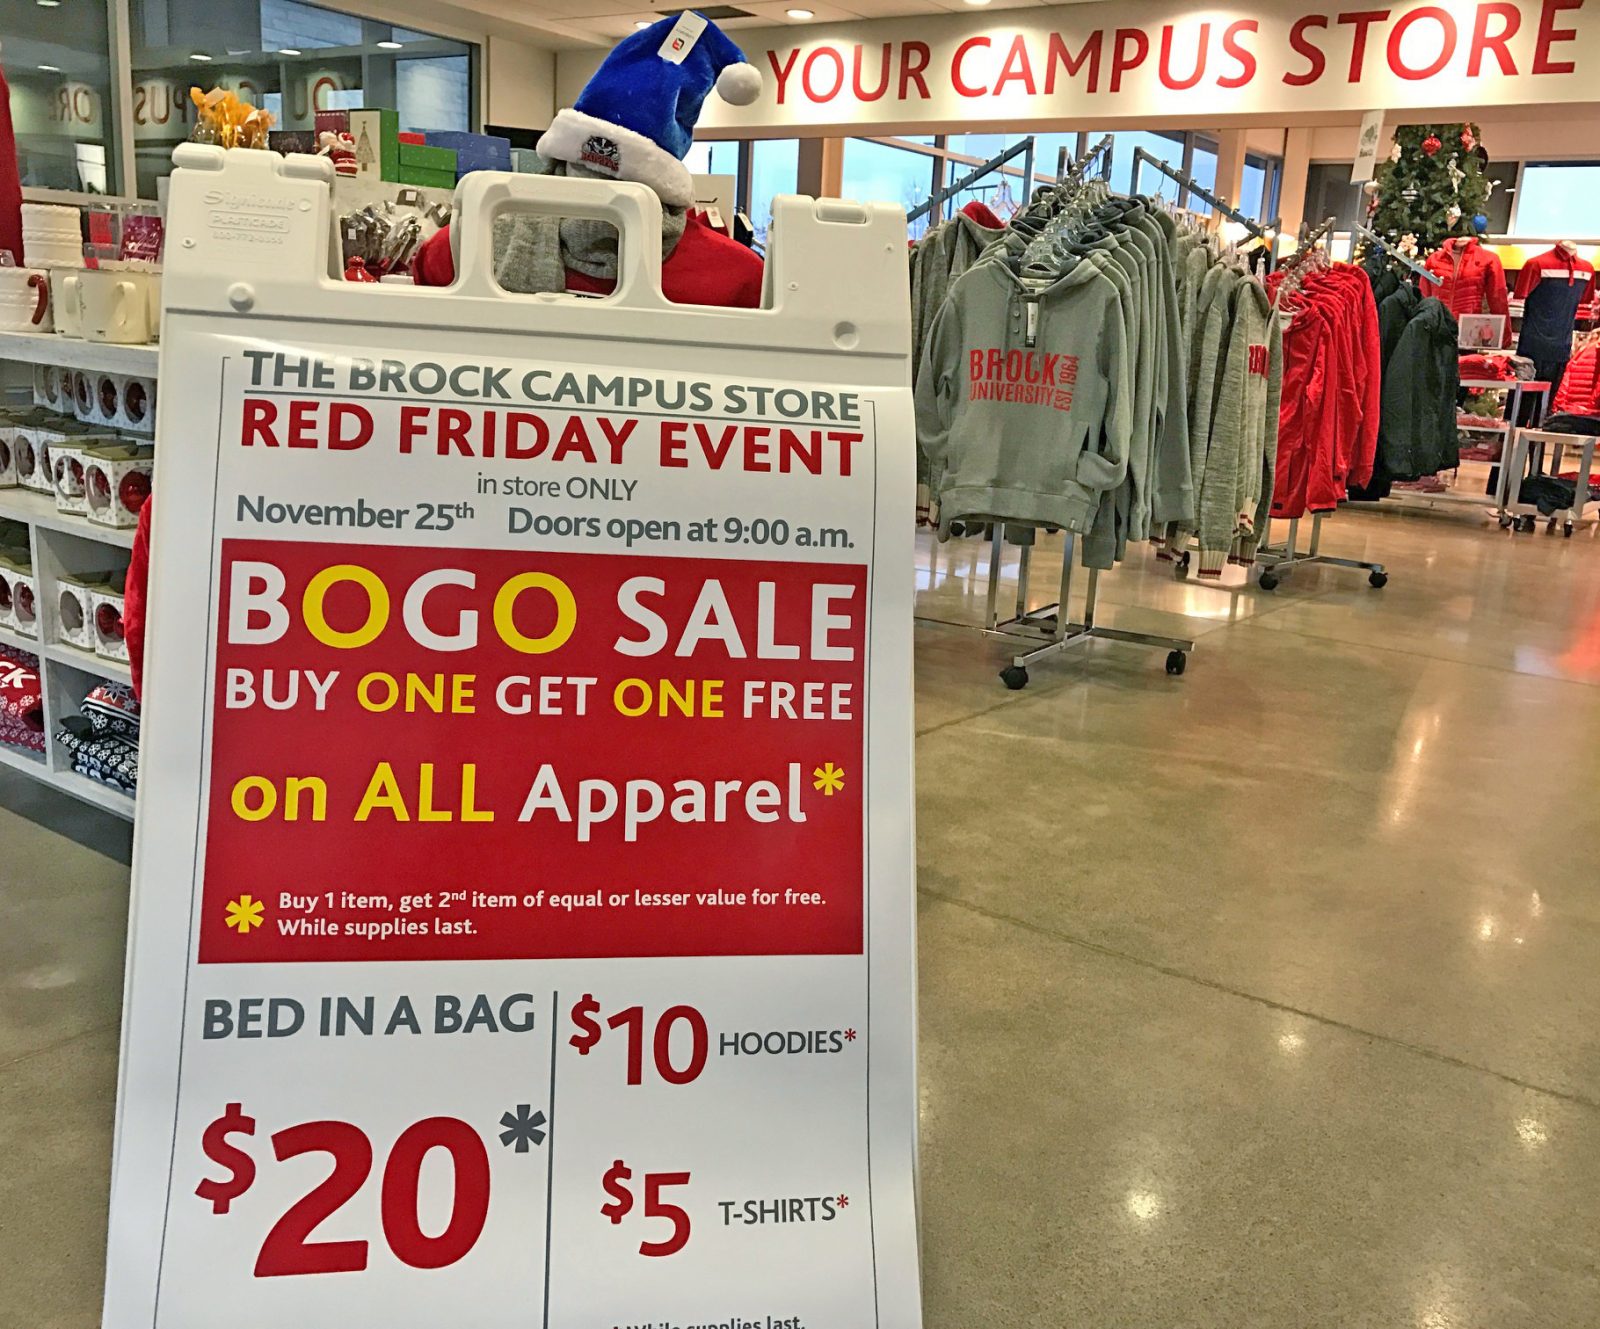 Red Friday deals hit Brock stores and dining services – The Brock News - What Department Stores Have Black Friday Deals